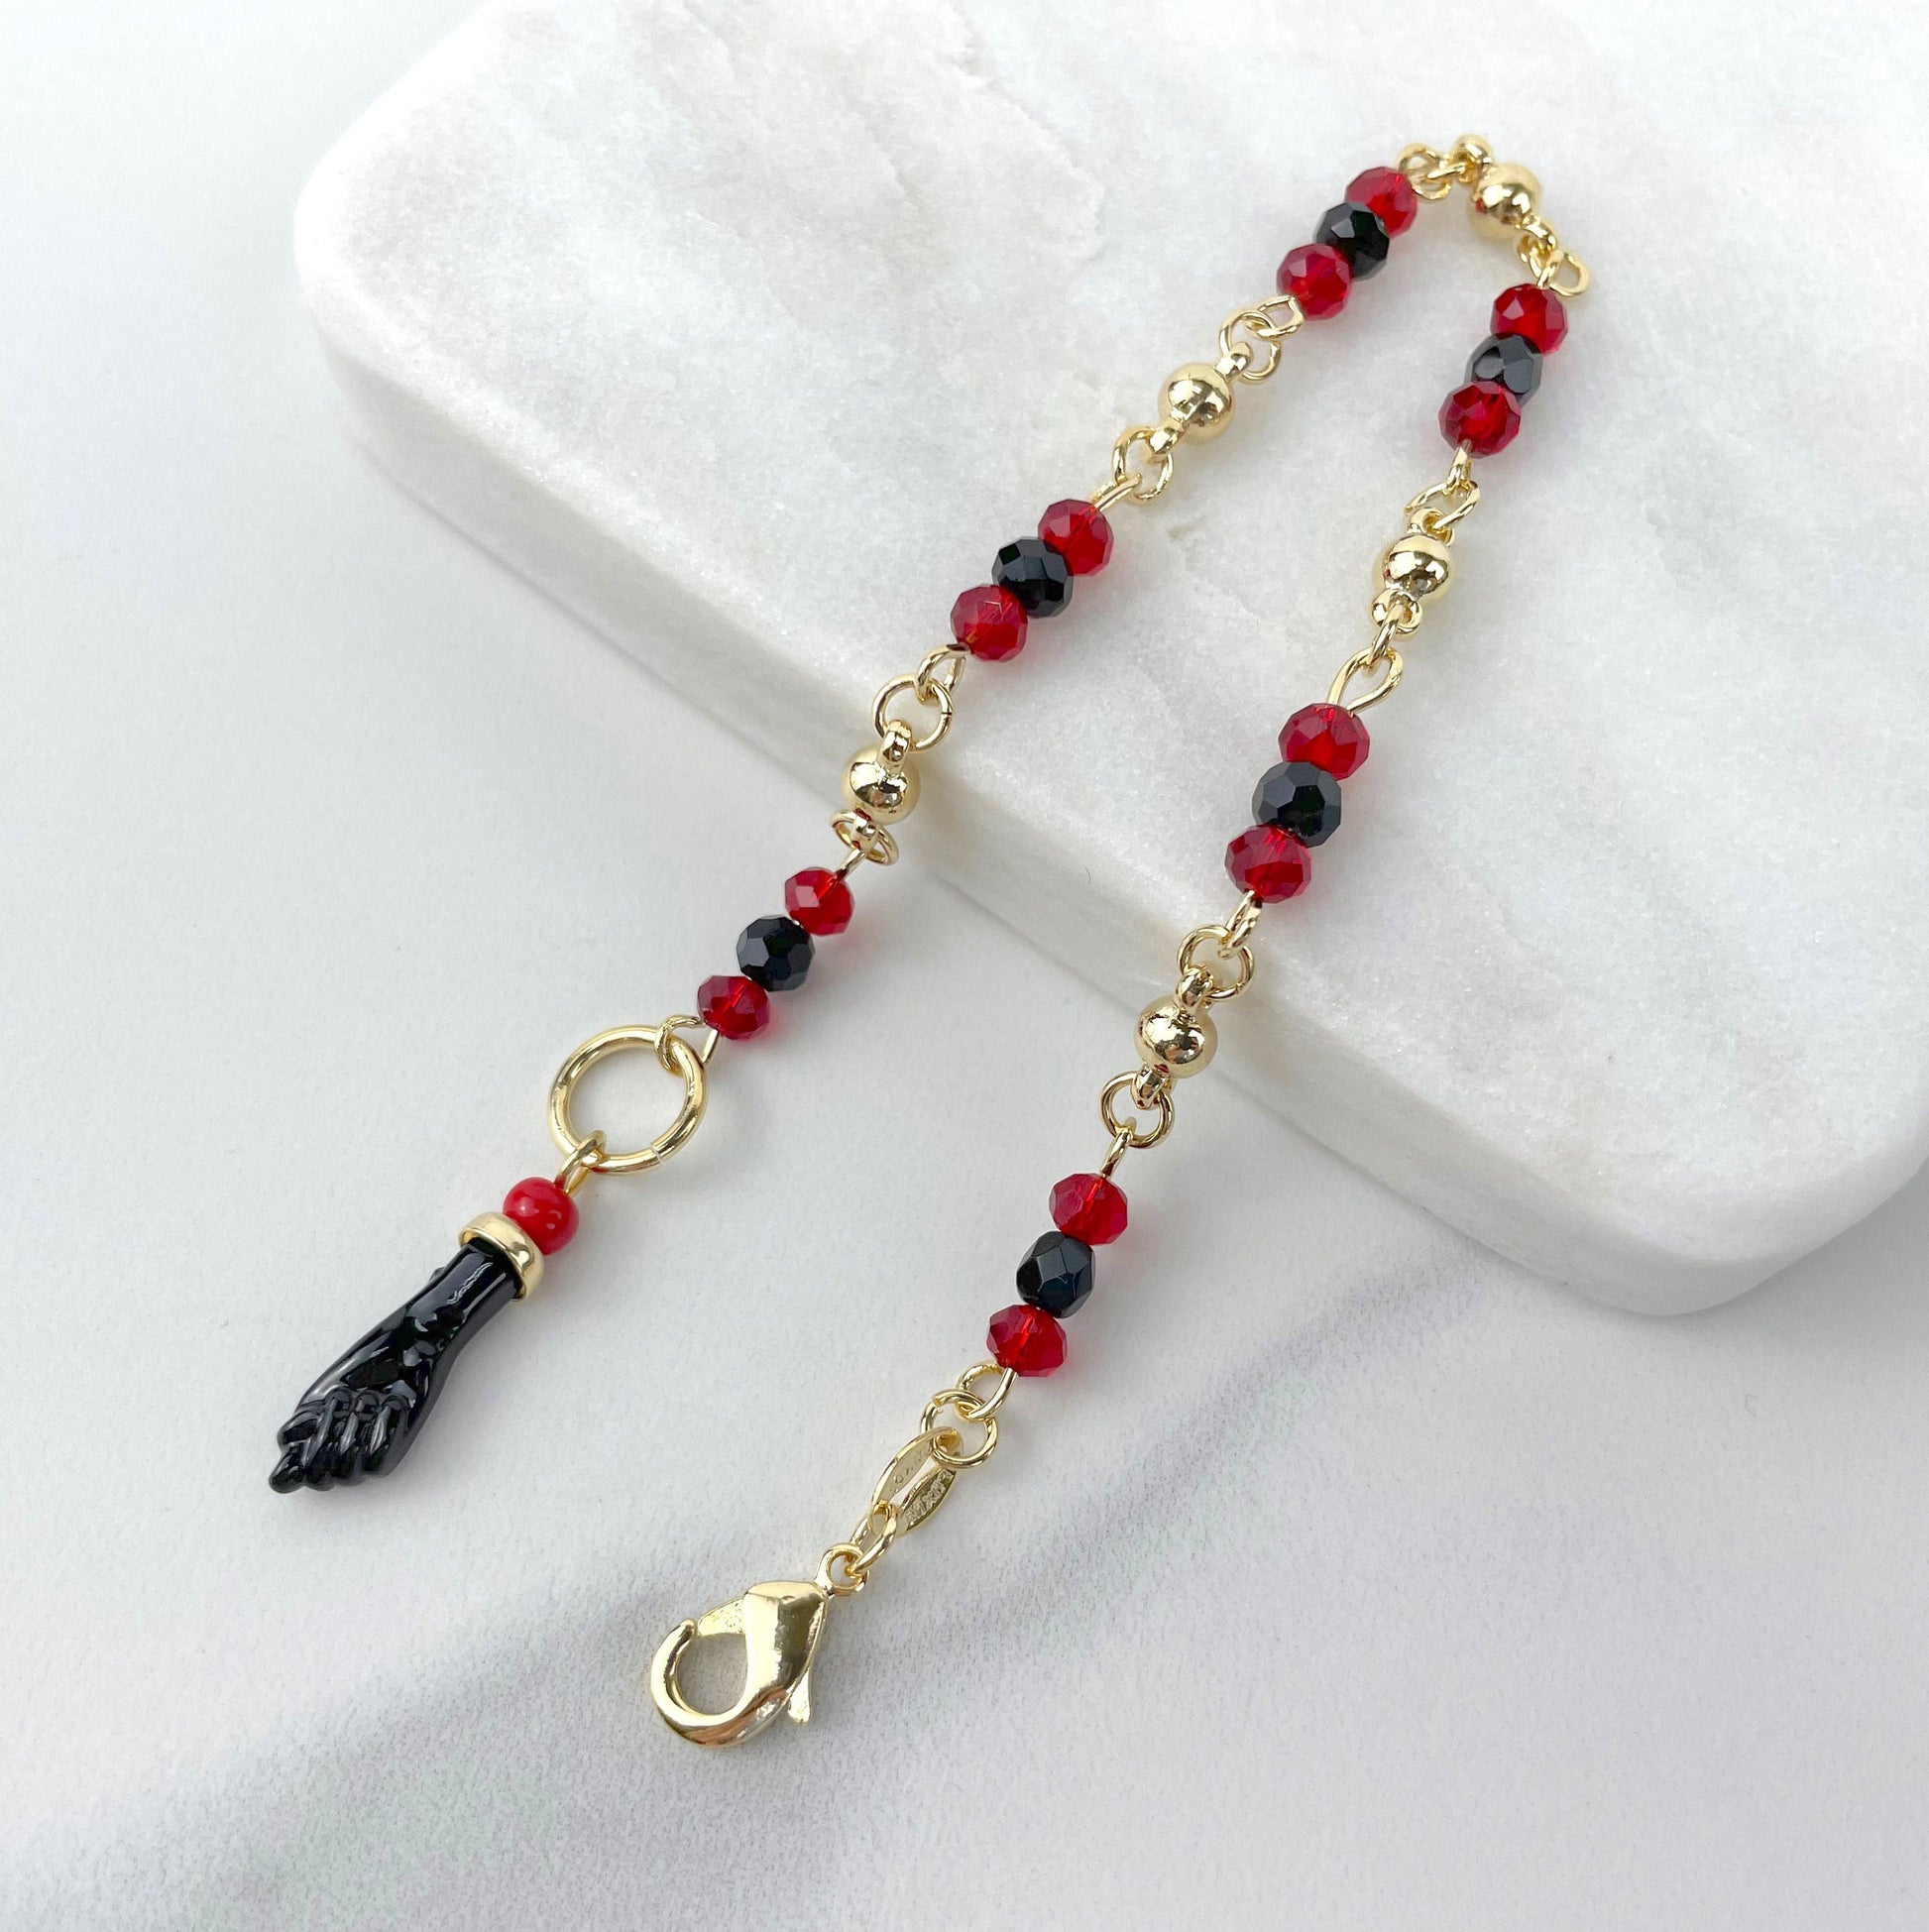 18k Gold Filled Red, Black & Gold Beads, Simulated Azabache, Figa Hand Charms Bracelet, Lucky Protection, Wholesale Jewelry Making Supplies